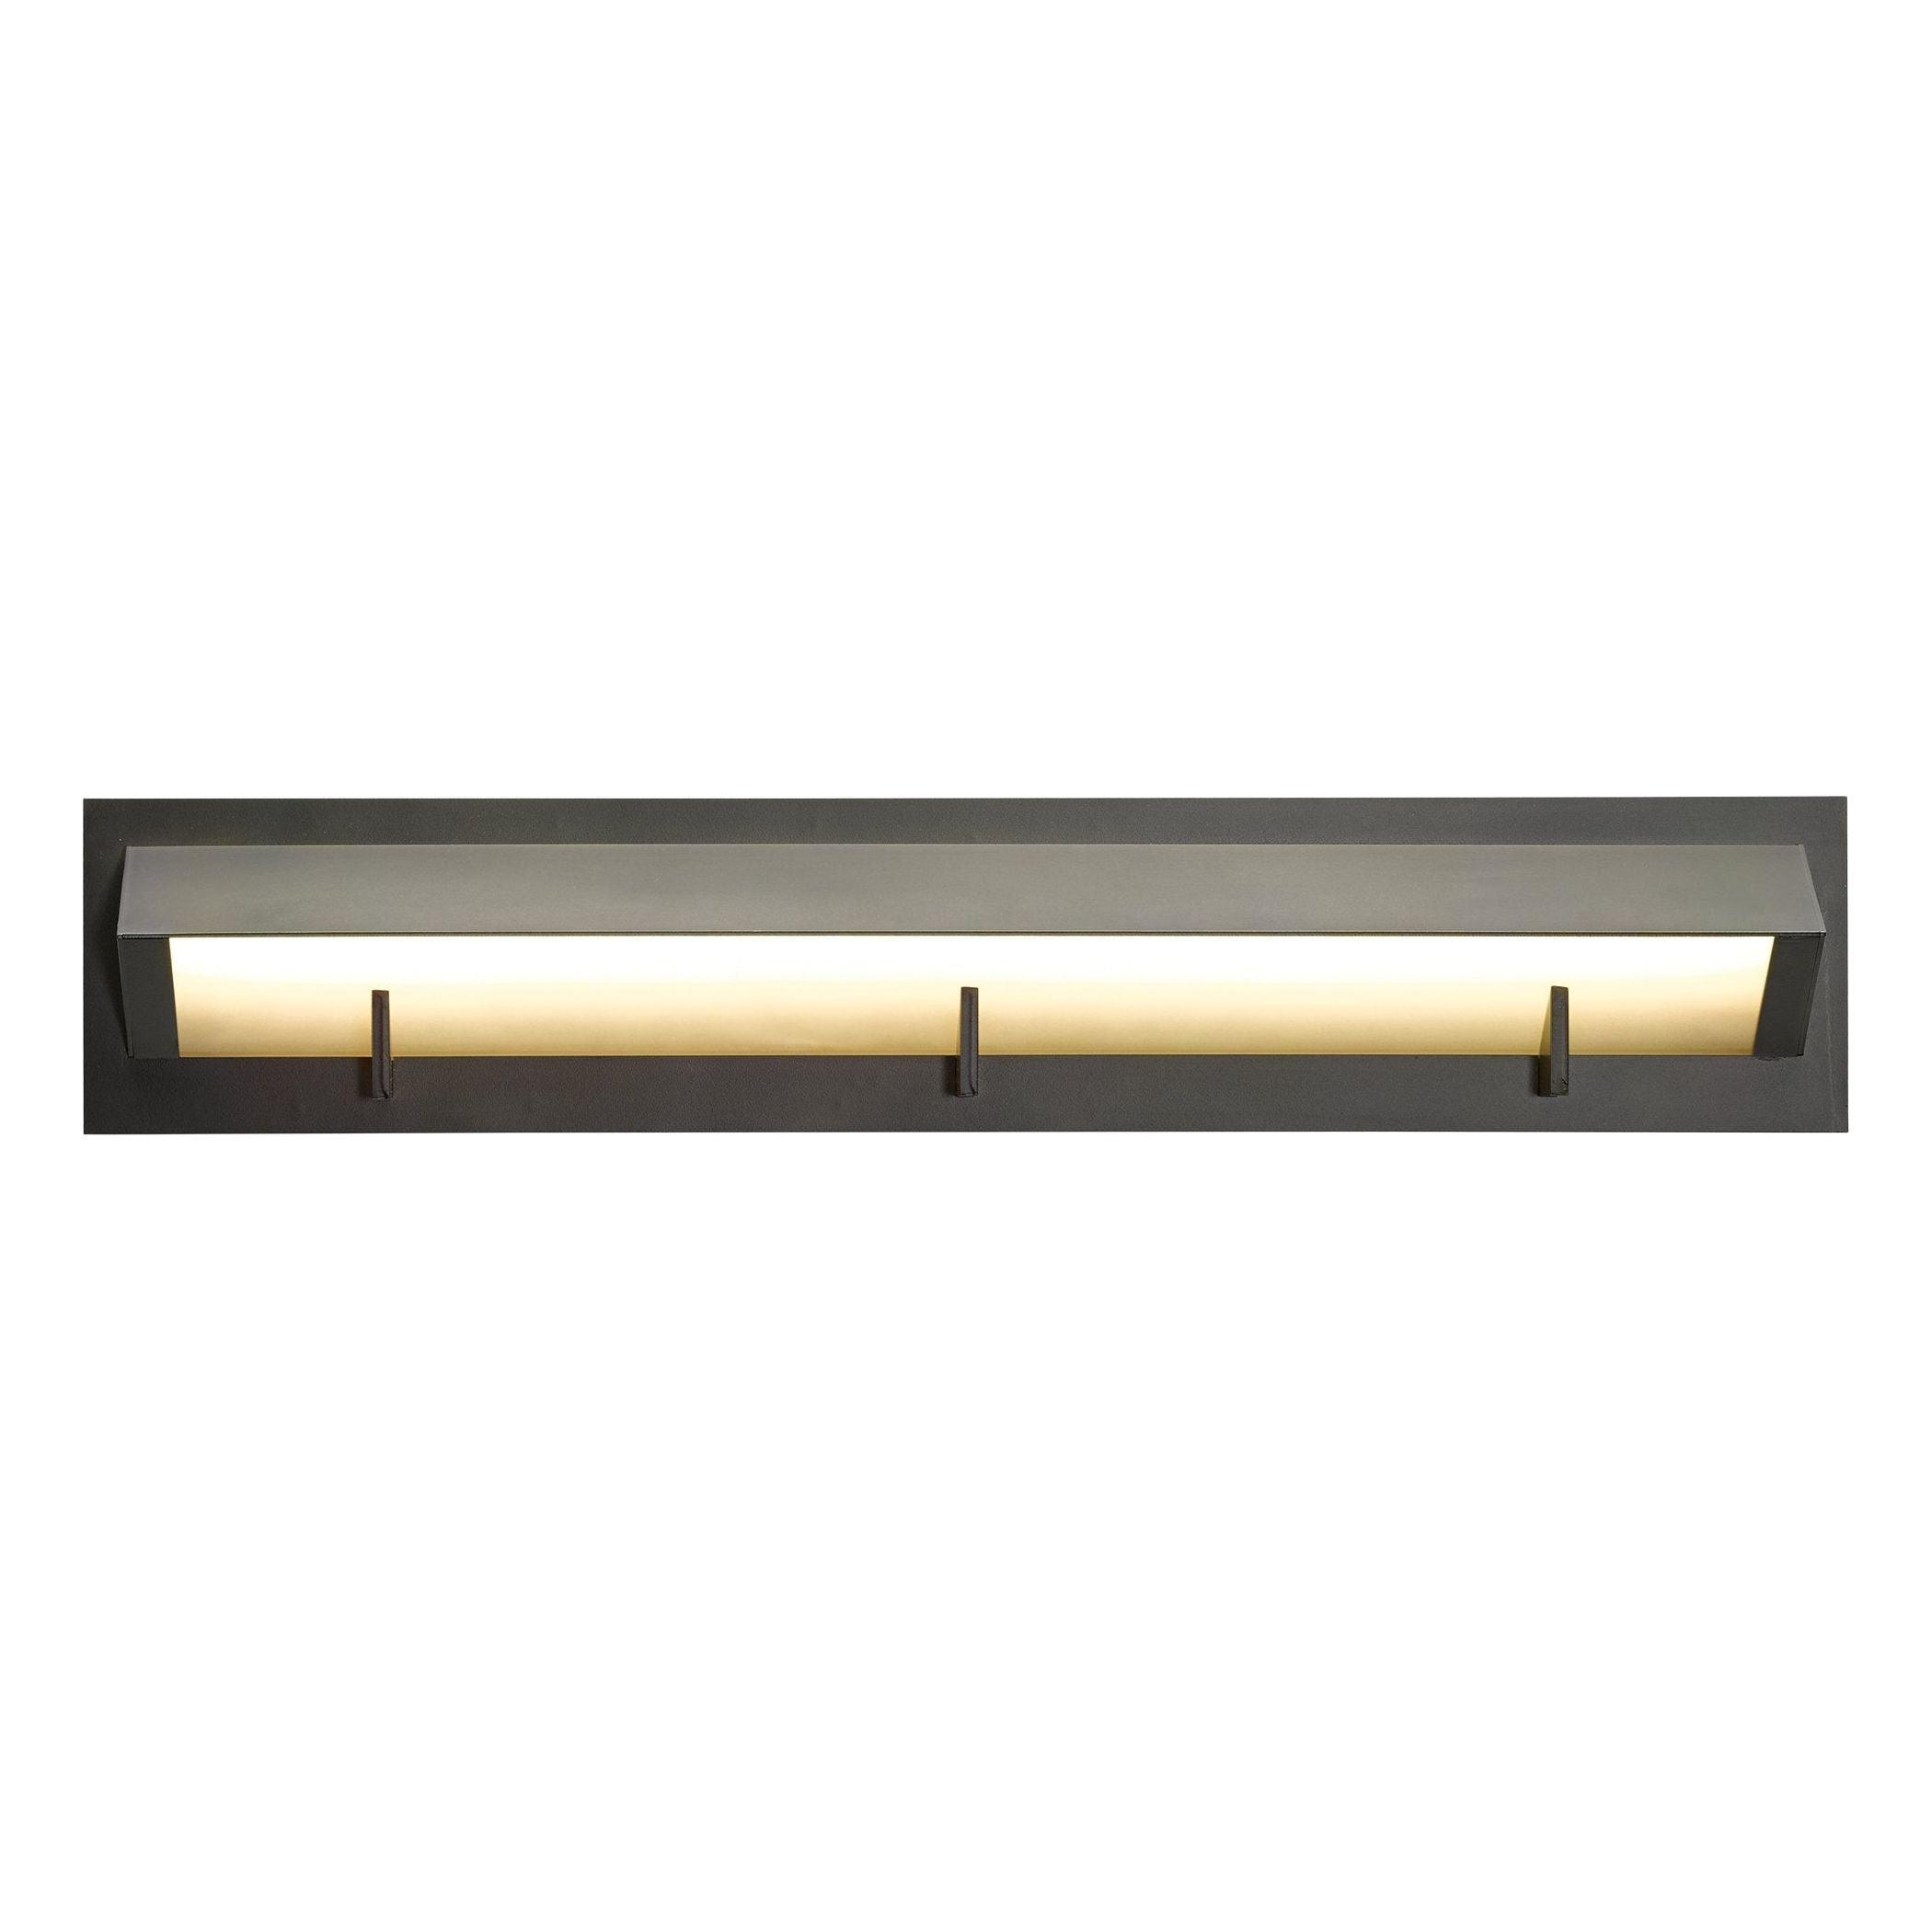 Hubbardton Forge - Wedge Sconce - Lights Canada